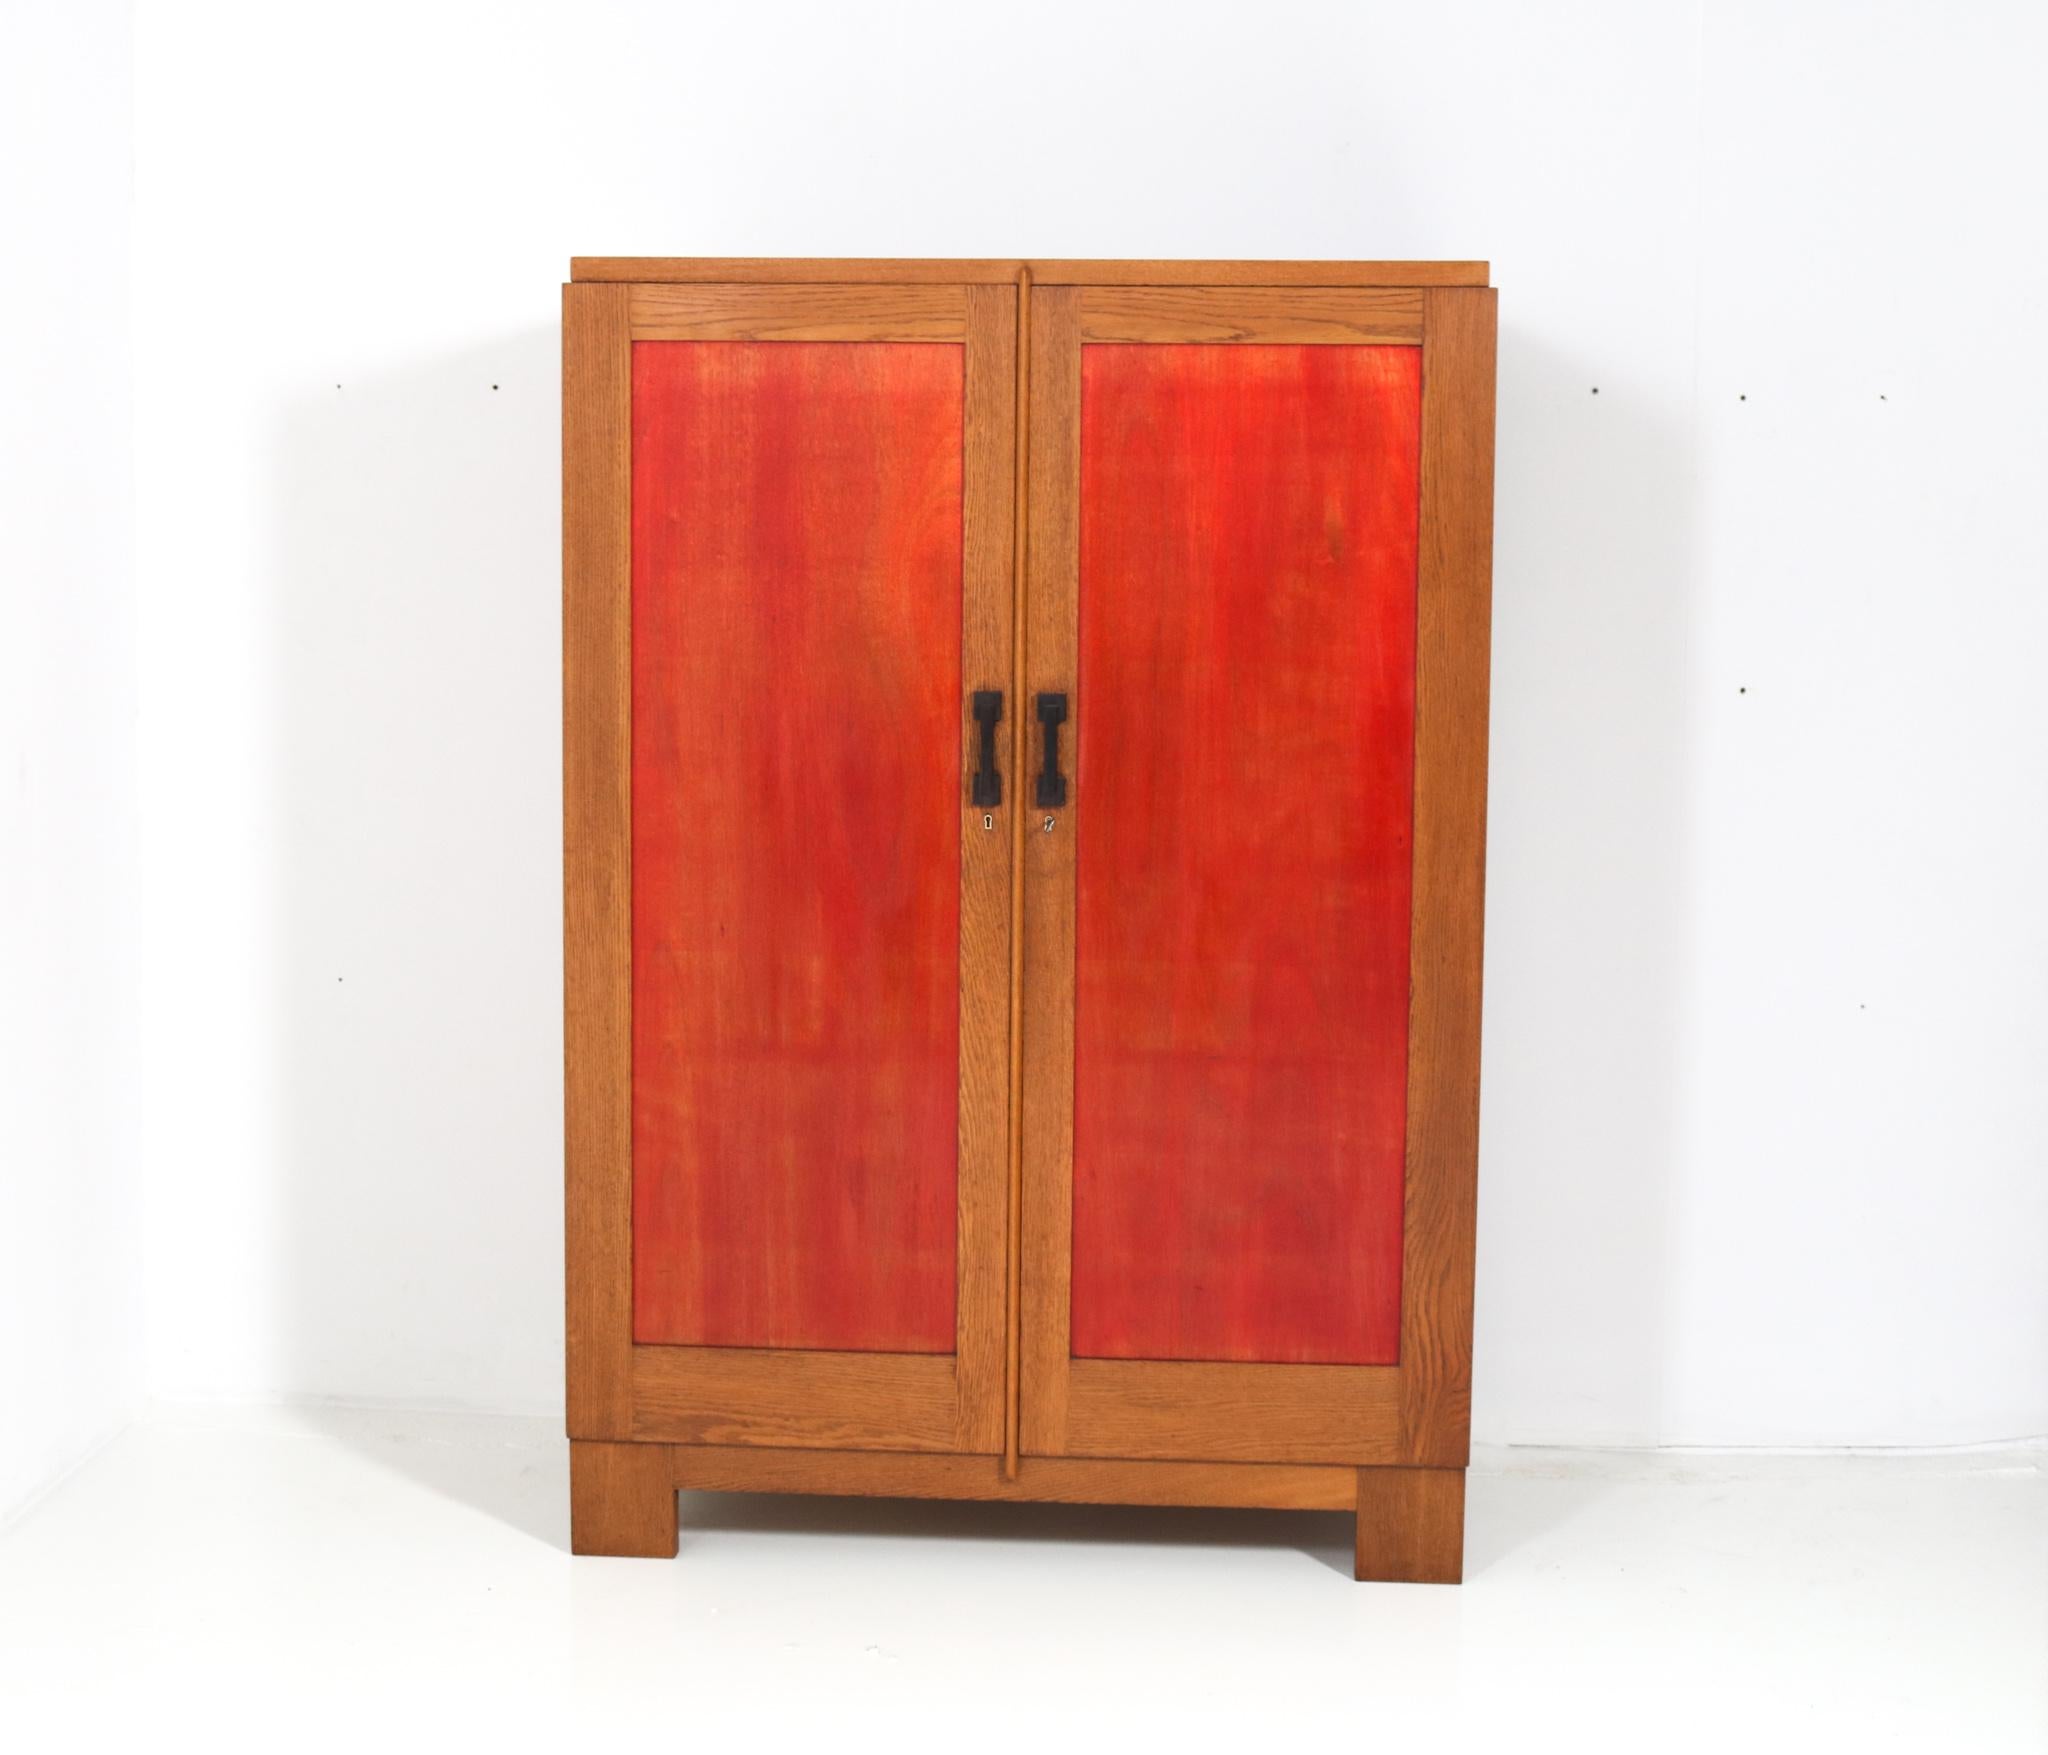 Magnificent and rare Art Deco Haagse School armoire or wardrobe.
Design by Cor Alons.
Striking Dutch design from the 1920s.
Solid oak frame with original red lacquered panels in doors and sides.
Six original oak shelves adjustable in